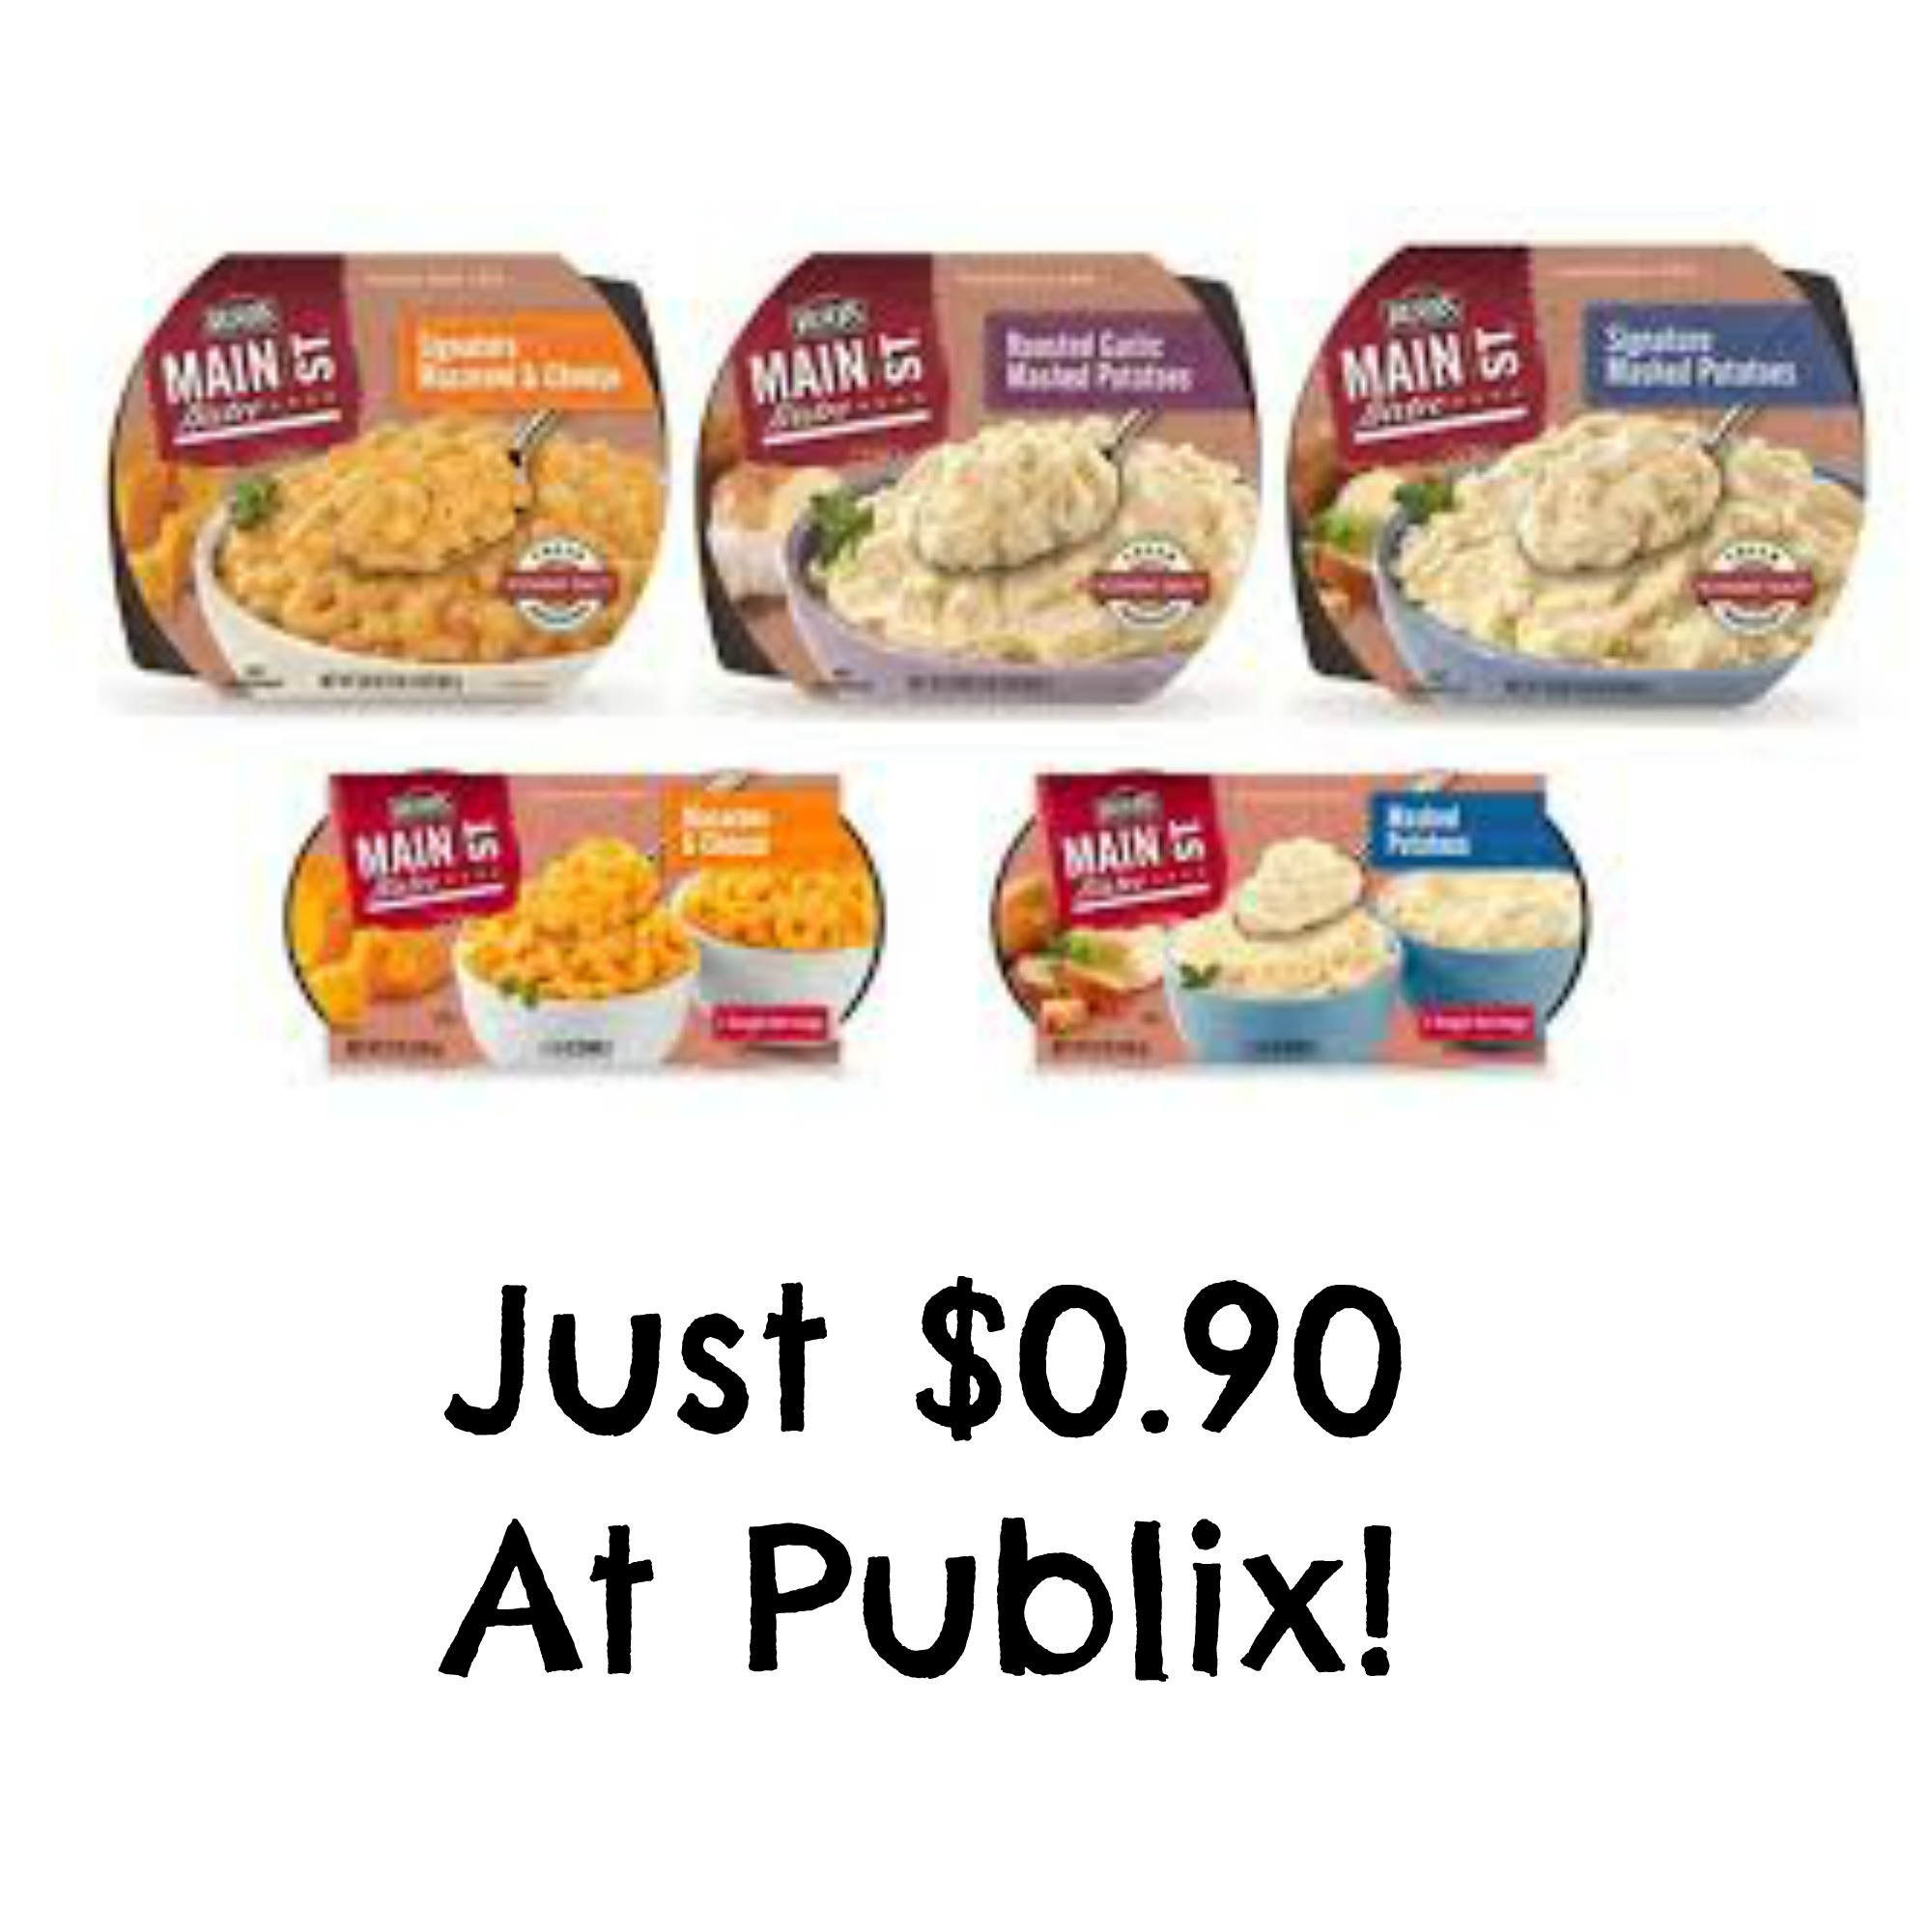 Publix Turkey Dinner
 Reser’s Side Dishes Just $0 90 At Publix